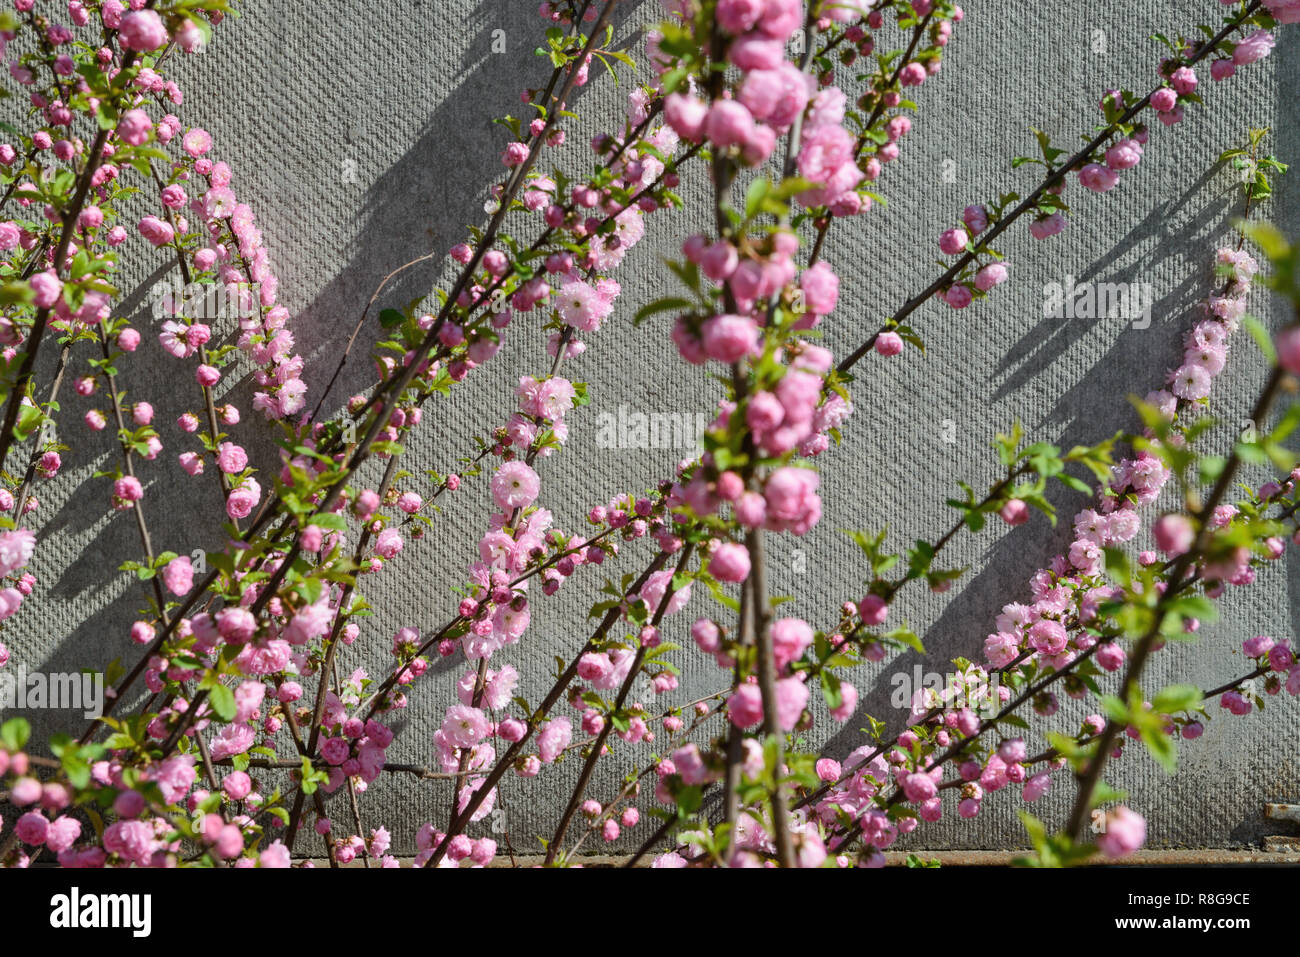 Many bright pink flowers that are starting bloom on twigs of  Prunus triloba bush in bright spring sunlight on gray background. Stock Photo